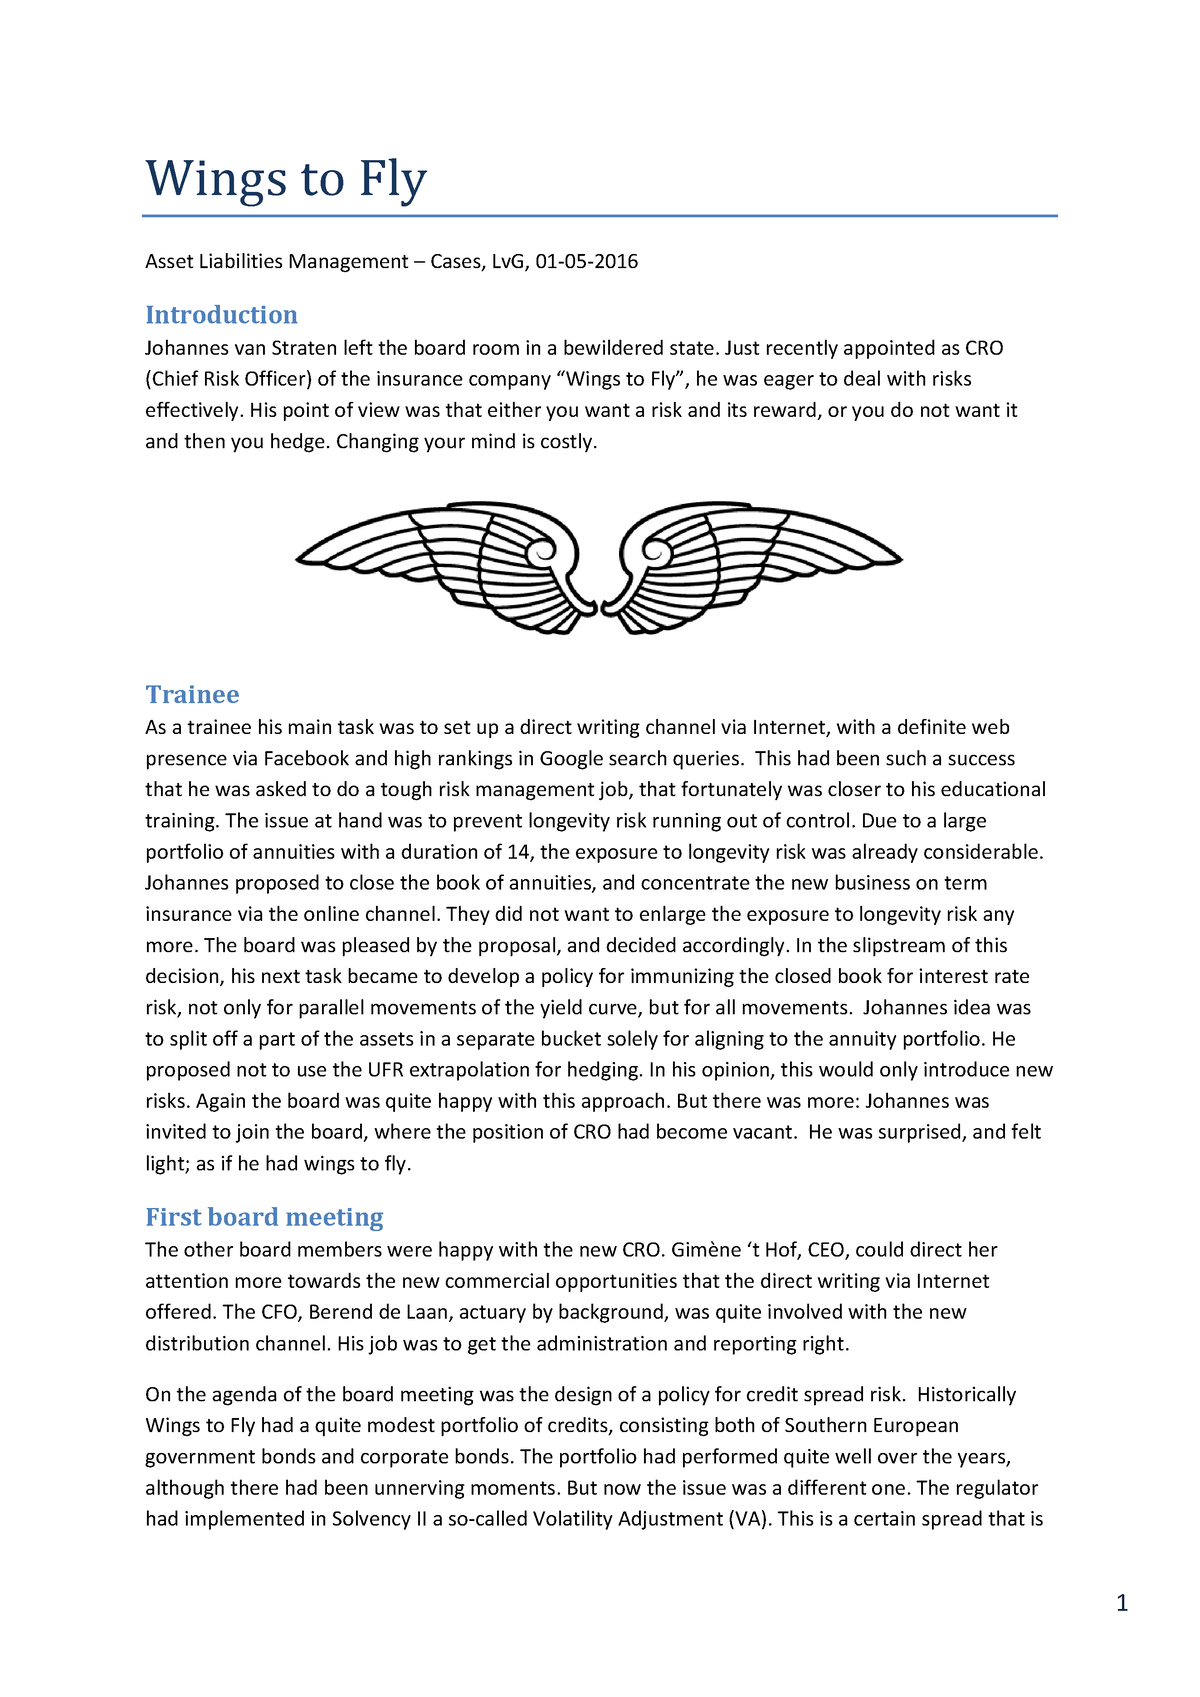 Wings To Fly v3 past paper Wings to Fly Asset Liabilities